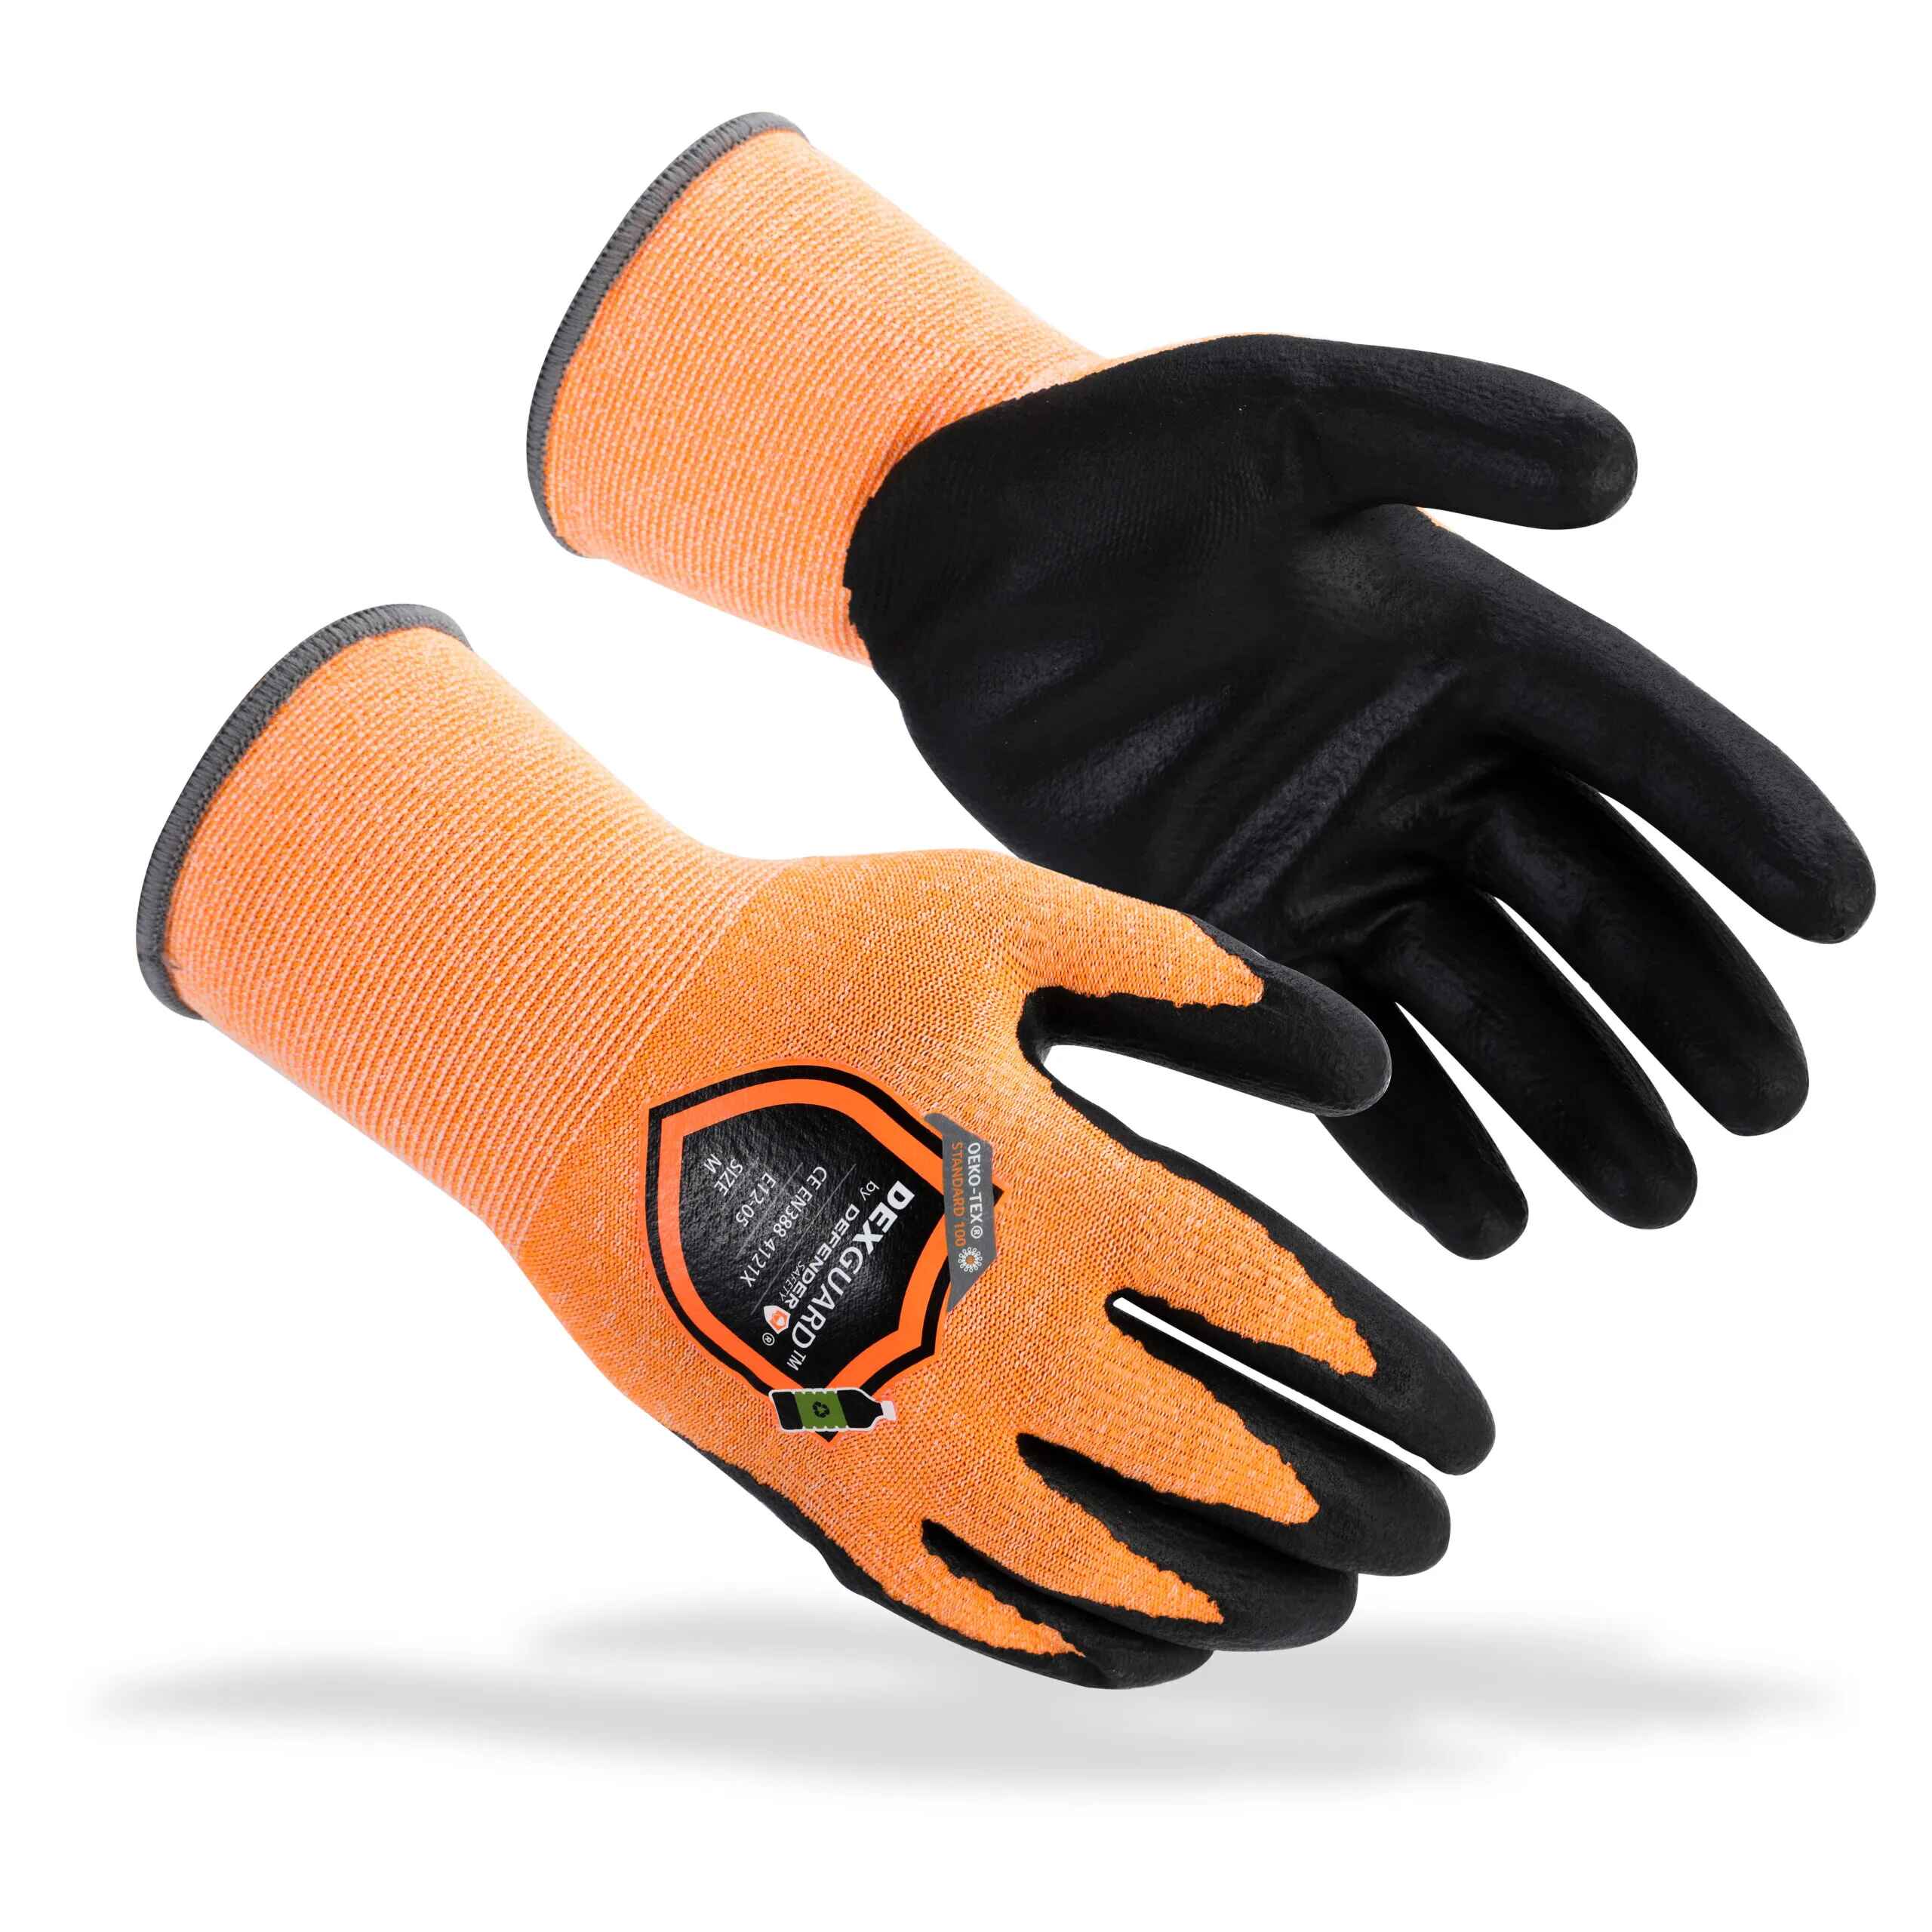 DEXGUARD™ General Purpose Recycled Gloves, Touch Screen Compatible, Abrasion Resistant Level 4, Foam Nitrile Coating - Defender Safety